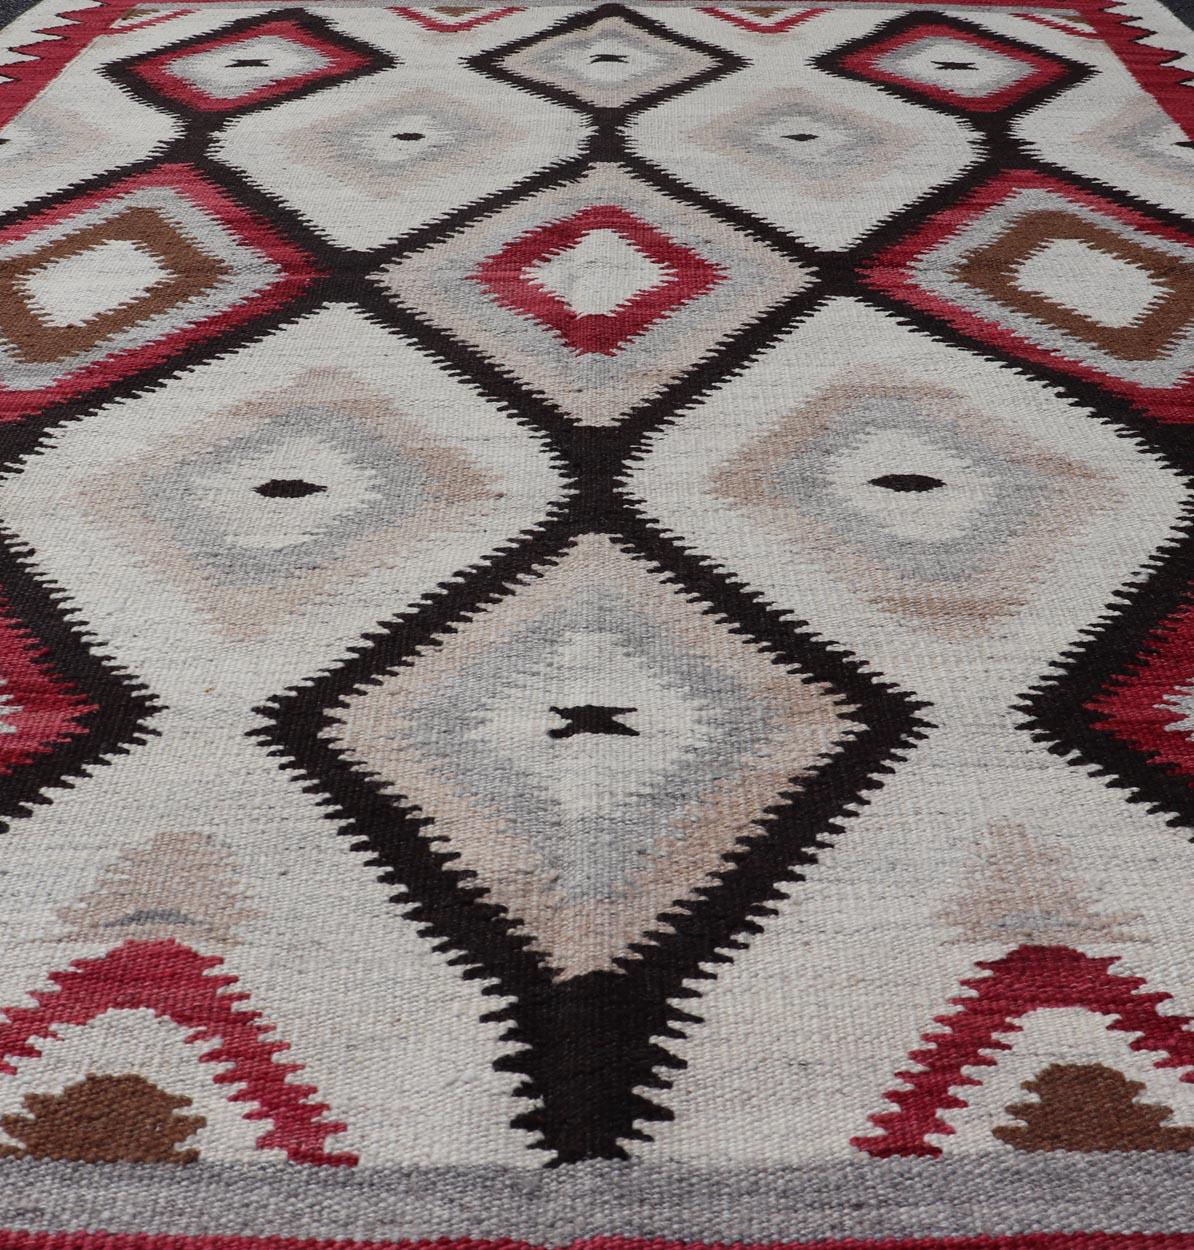 American Navajo Design Rug with Latticework Tribal Design in Red, Black and Gray. Keivan Woven Arts / rug RSC-85543-AR-166, country of origin / type: North America / Navajo, circa early 21st century. 
Measures: 5'2 x 7'9 
This intriguing